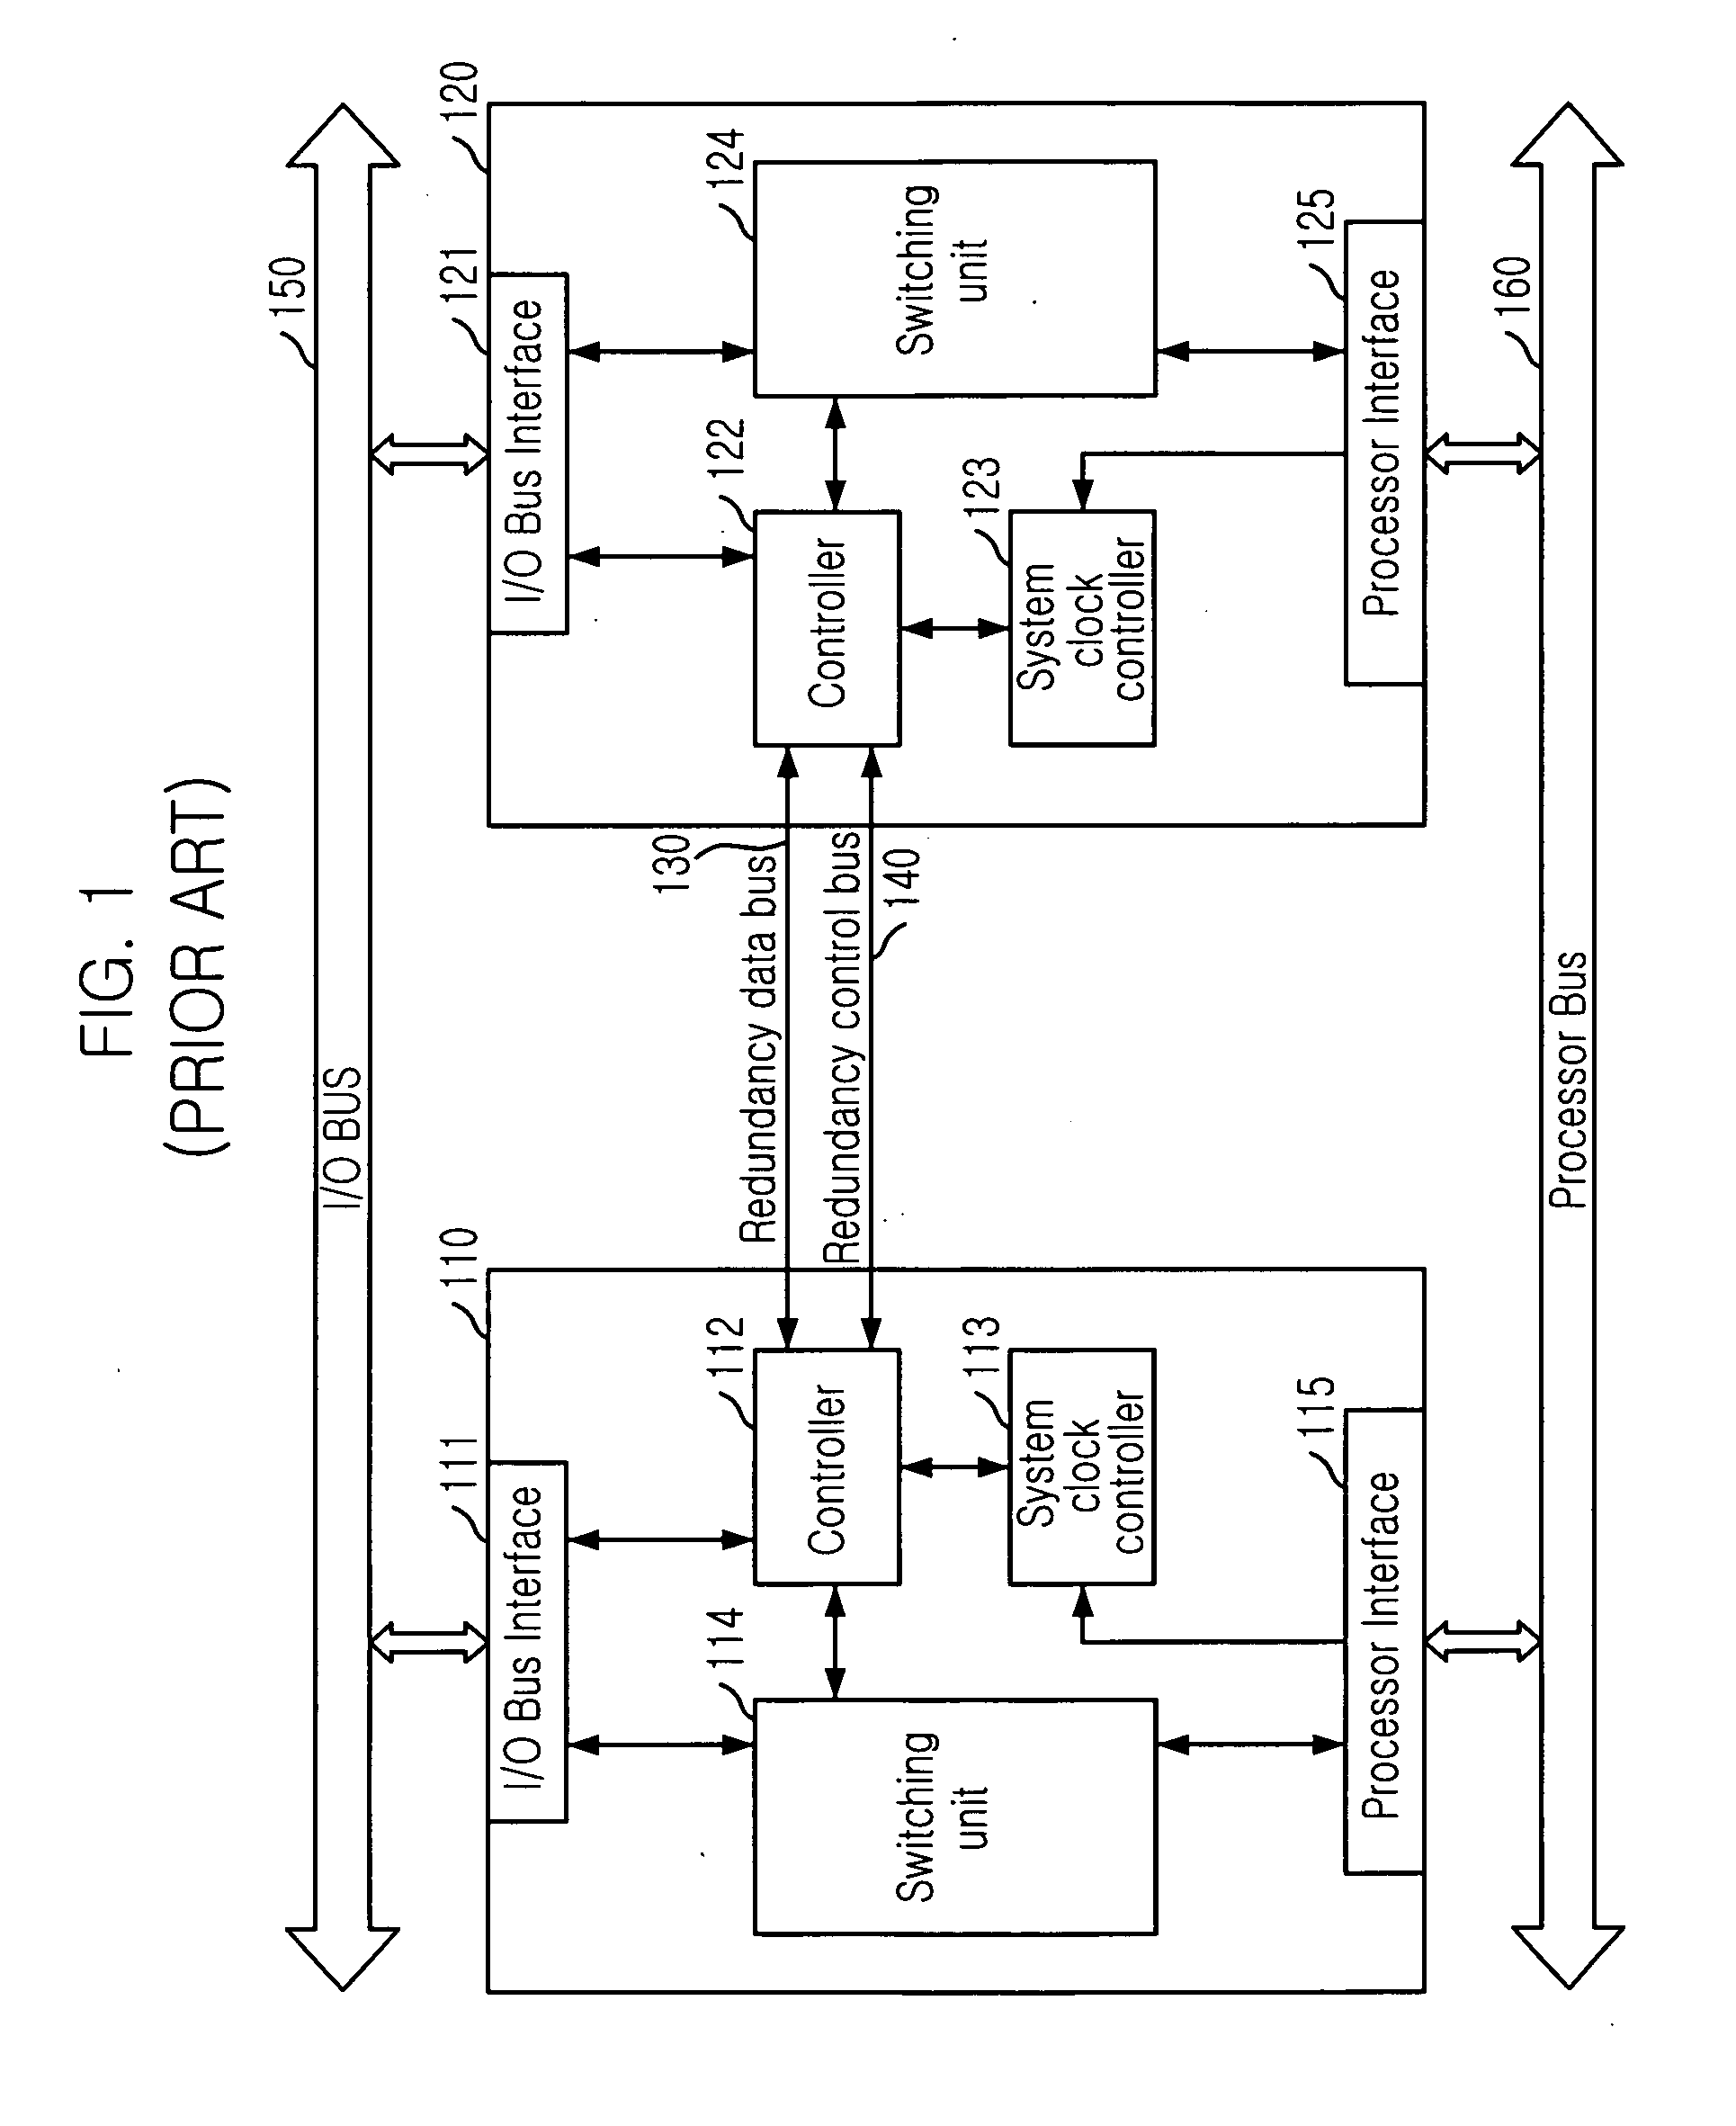 Apparatus and method for redundancy control of duplex switch board